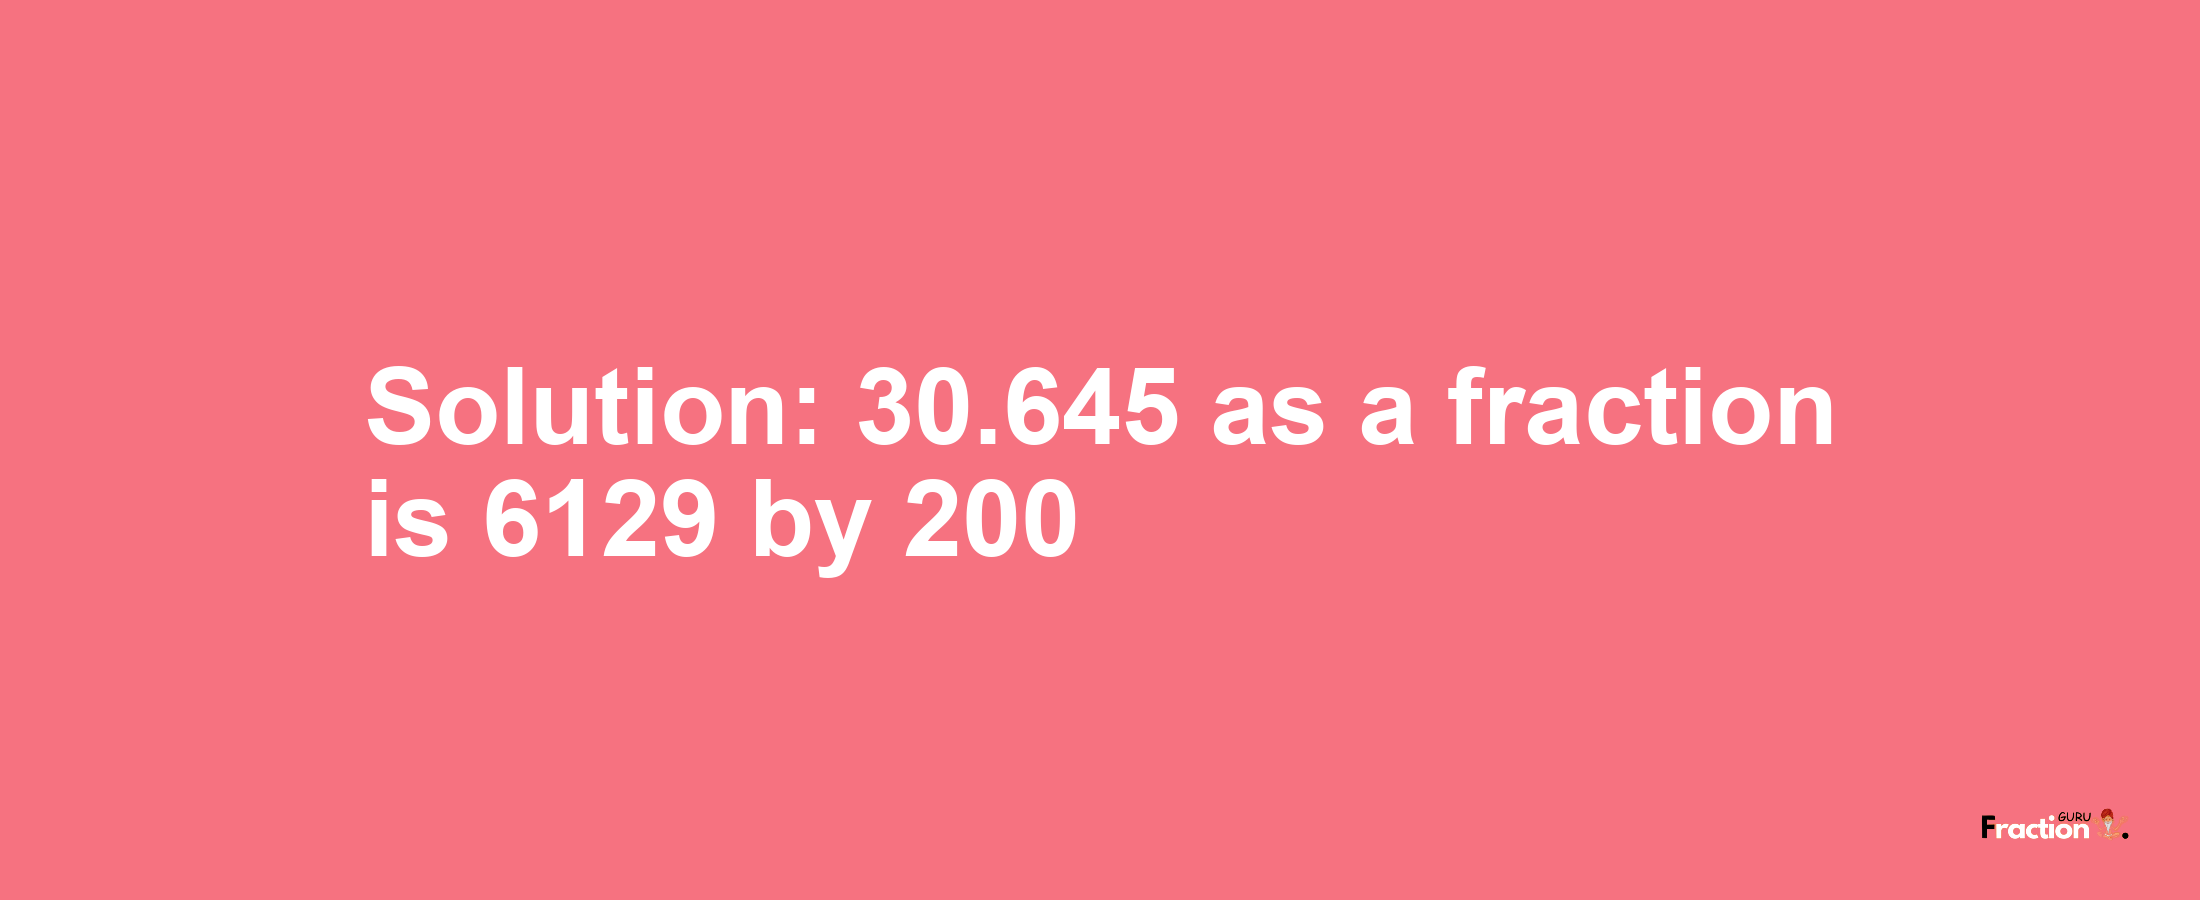 Solution:30.645 as a fraction is 6129/200